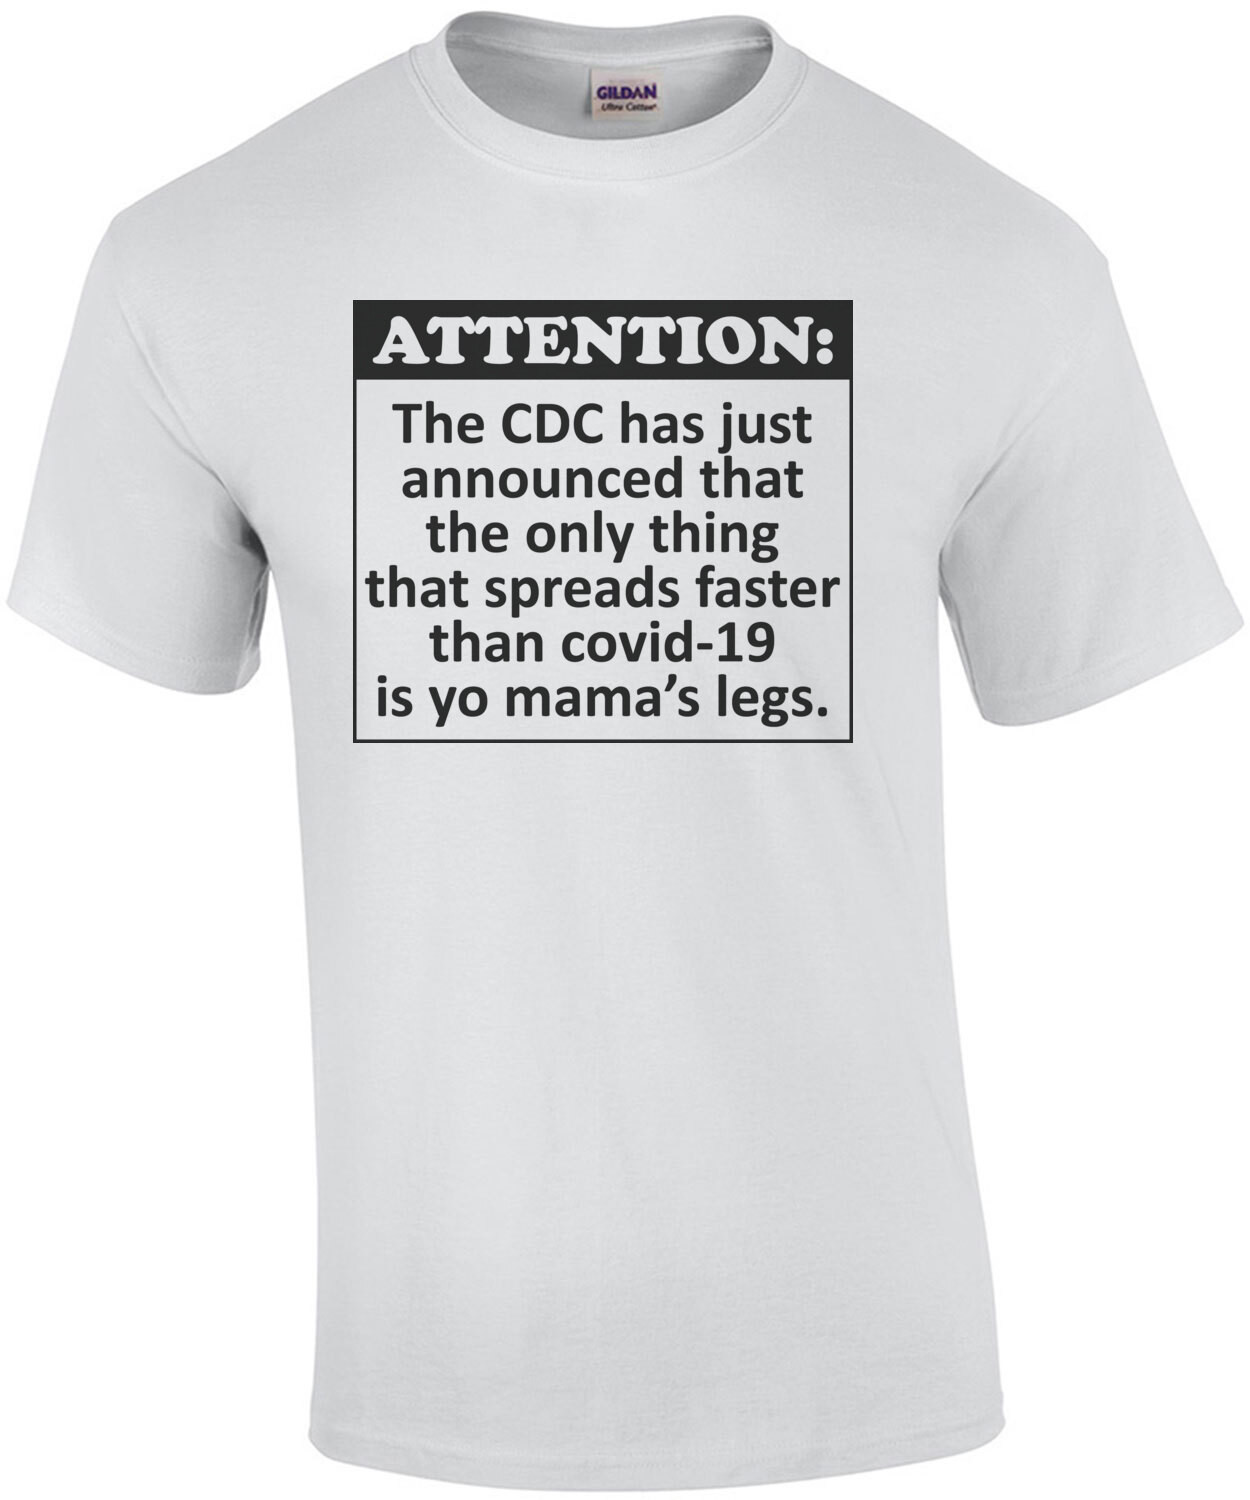 The Only Thing That Spreads Faster Than Covid-19 Is Yo Mama's Legs - Coronavirus Shirt